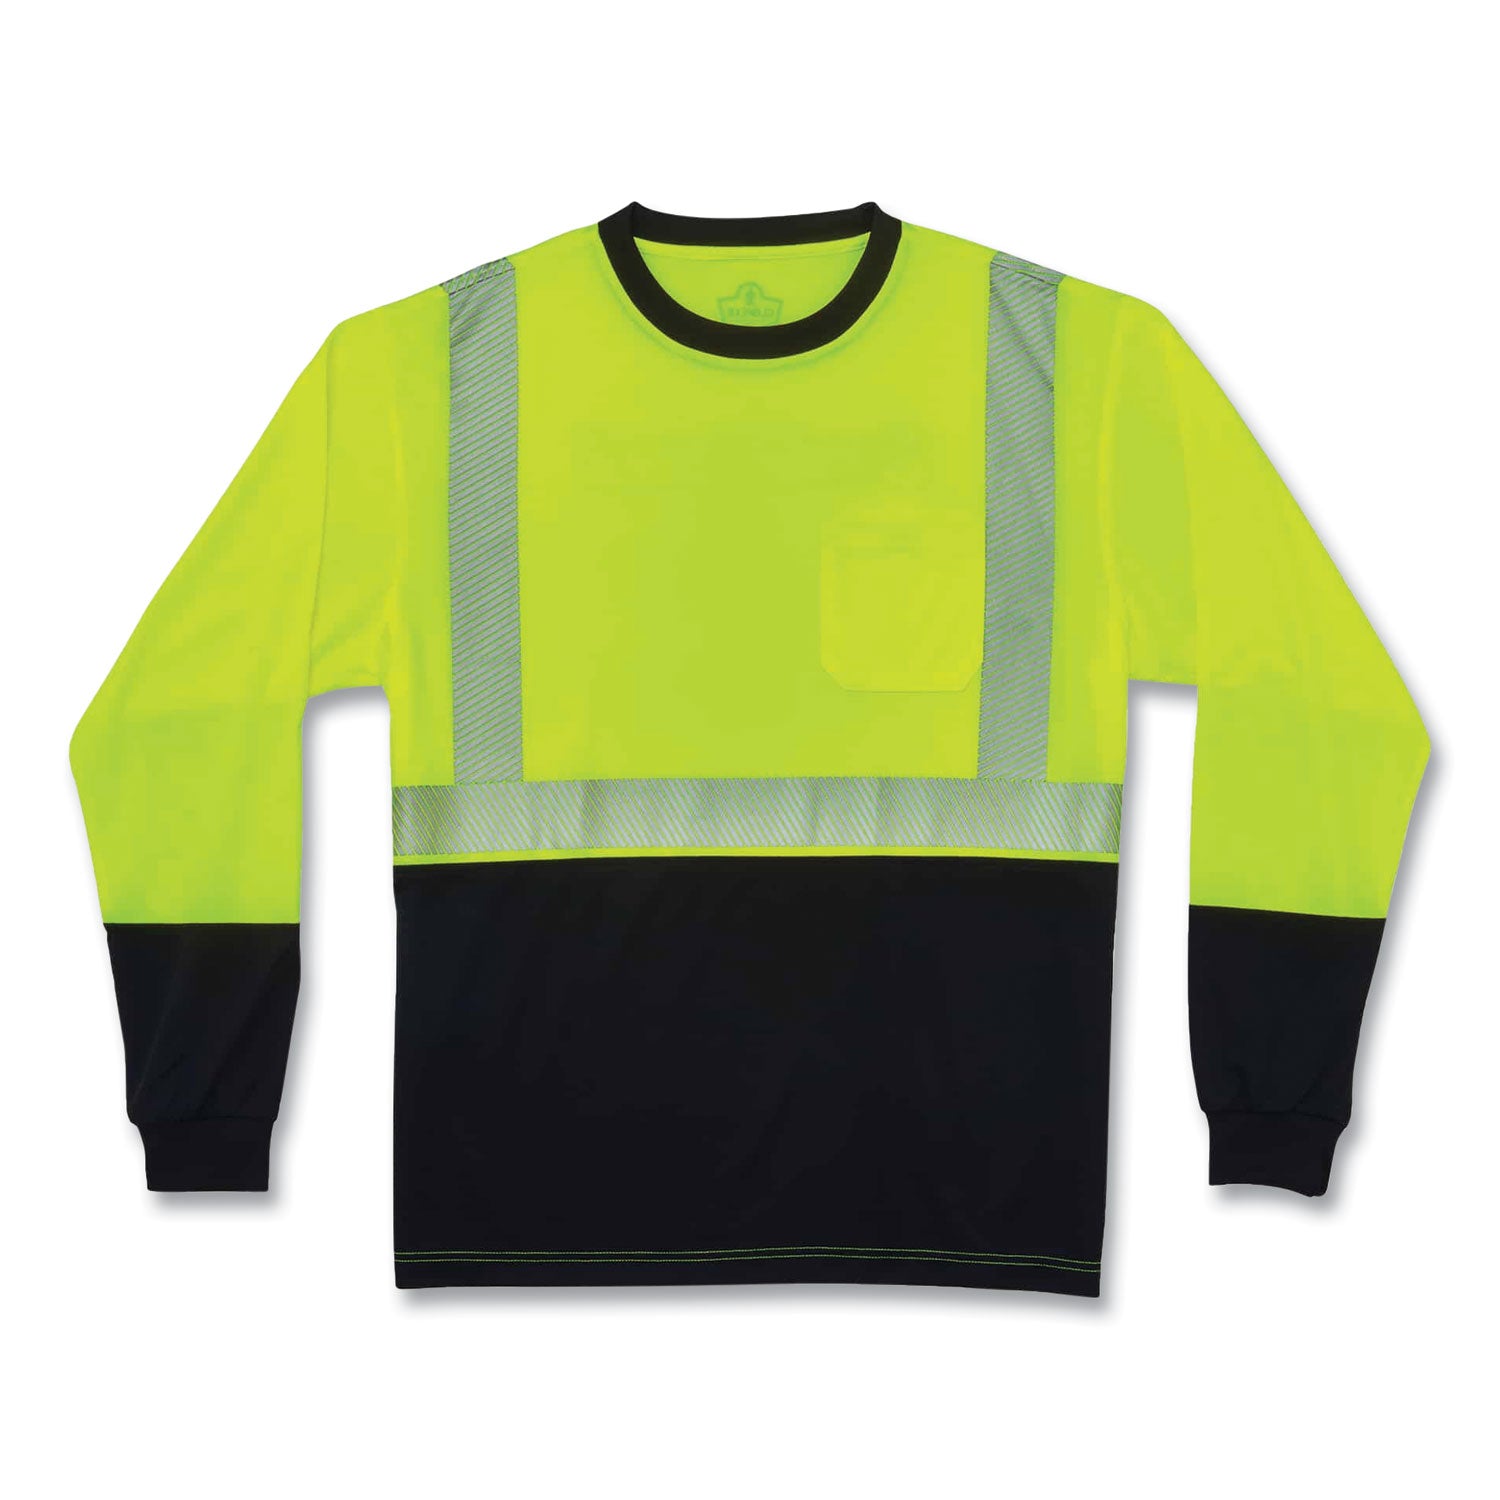 glowear-8281bk-class-2-long-sleeve-shirt-with-black-bottom-polyester-x-large-lime-ships-in-1-3-business-days_ego22635 - 1